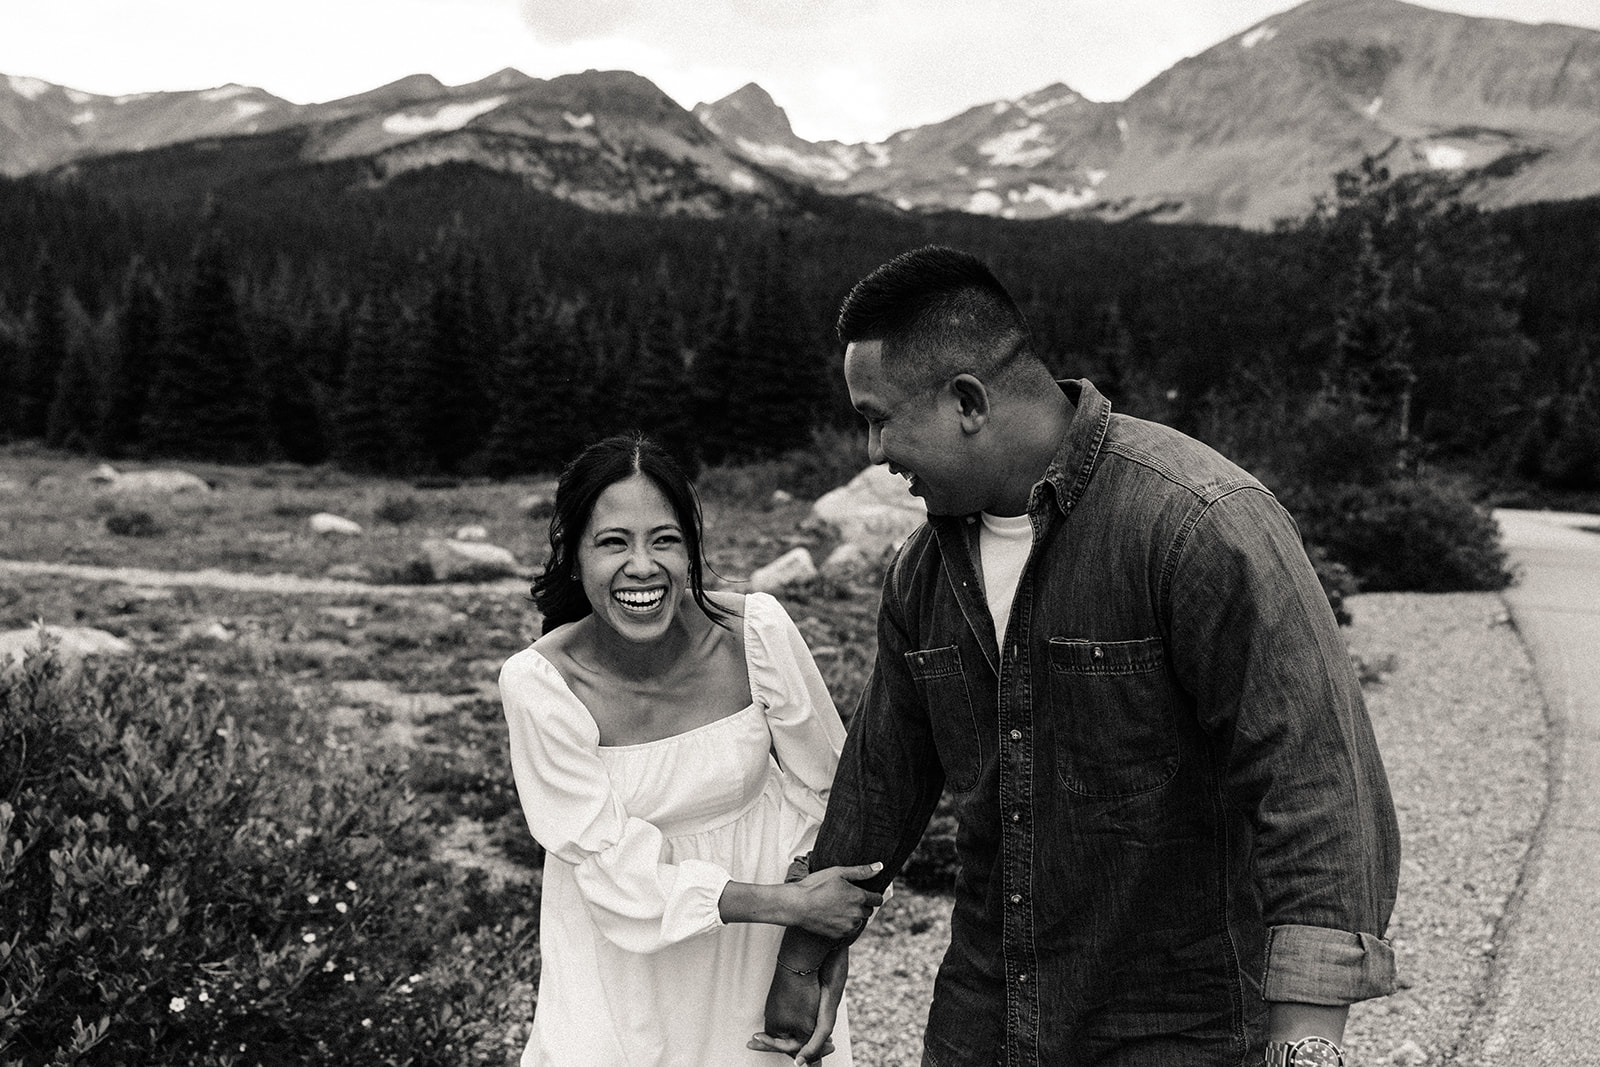 A black and white image of the engaged couple laughing as she holds his arm lower, the mountains sore behind them.